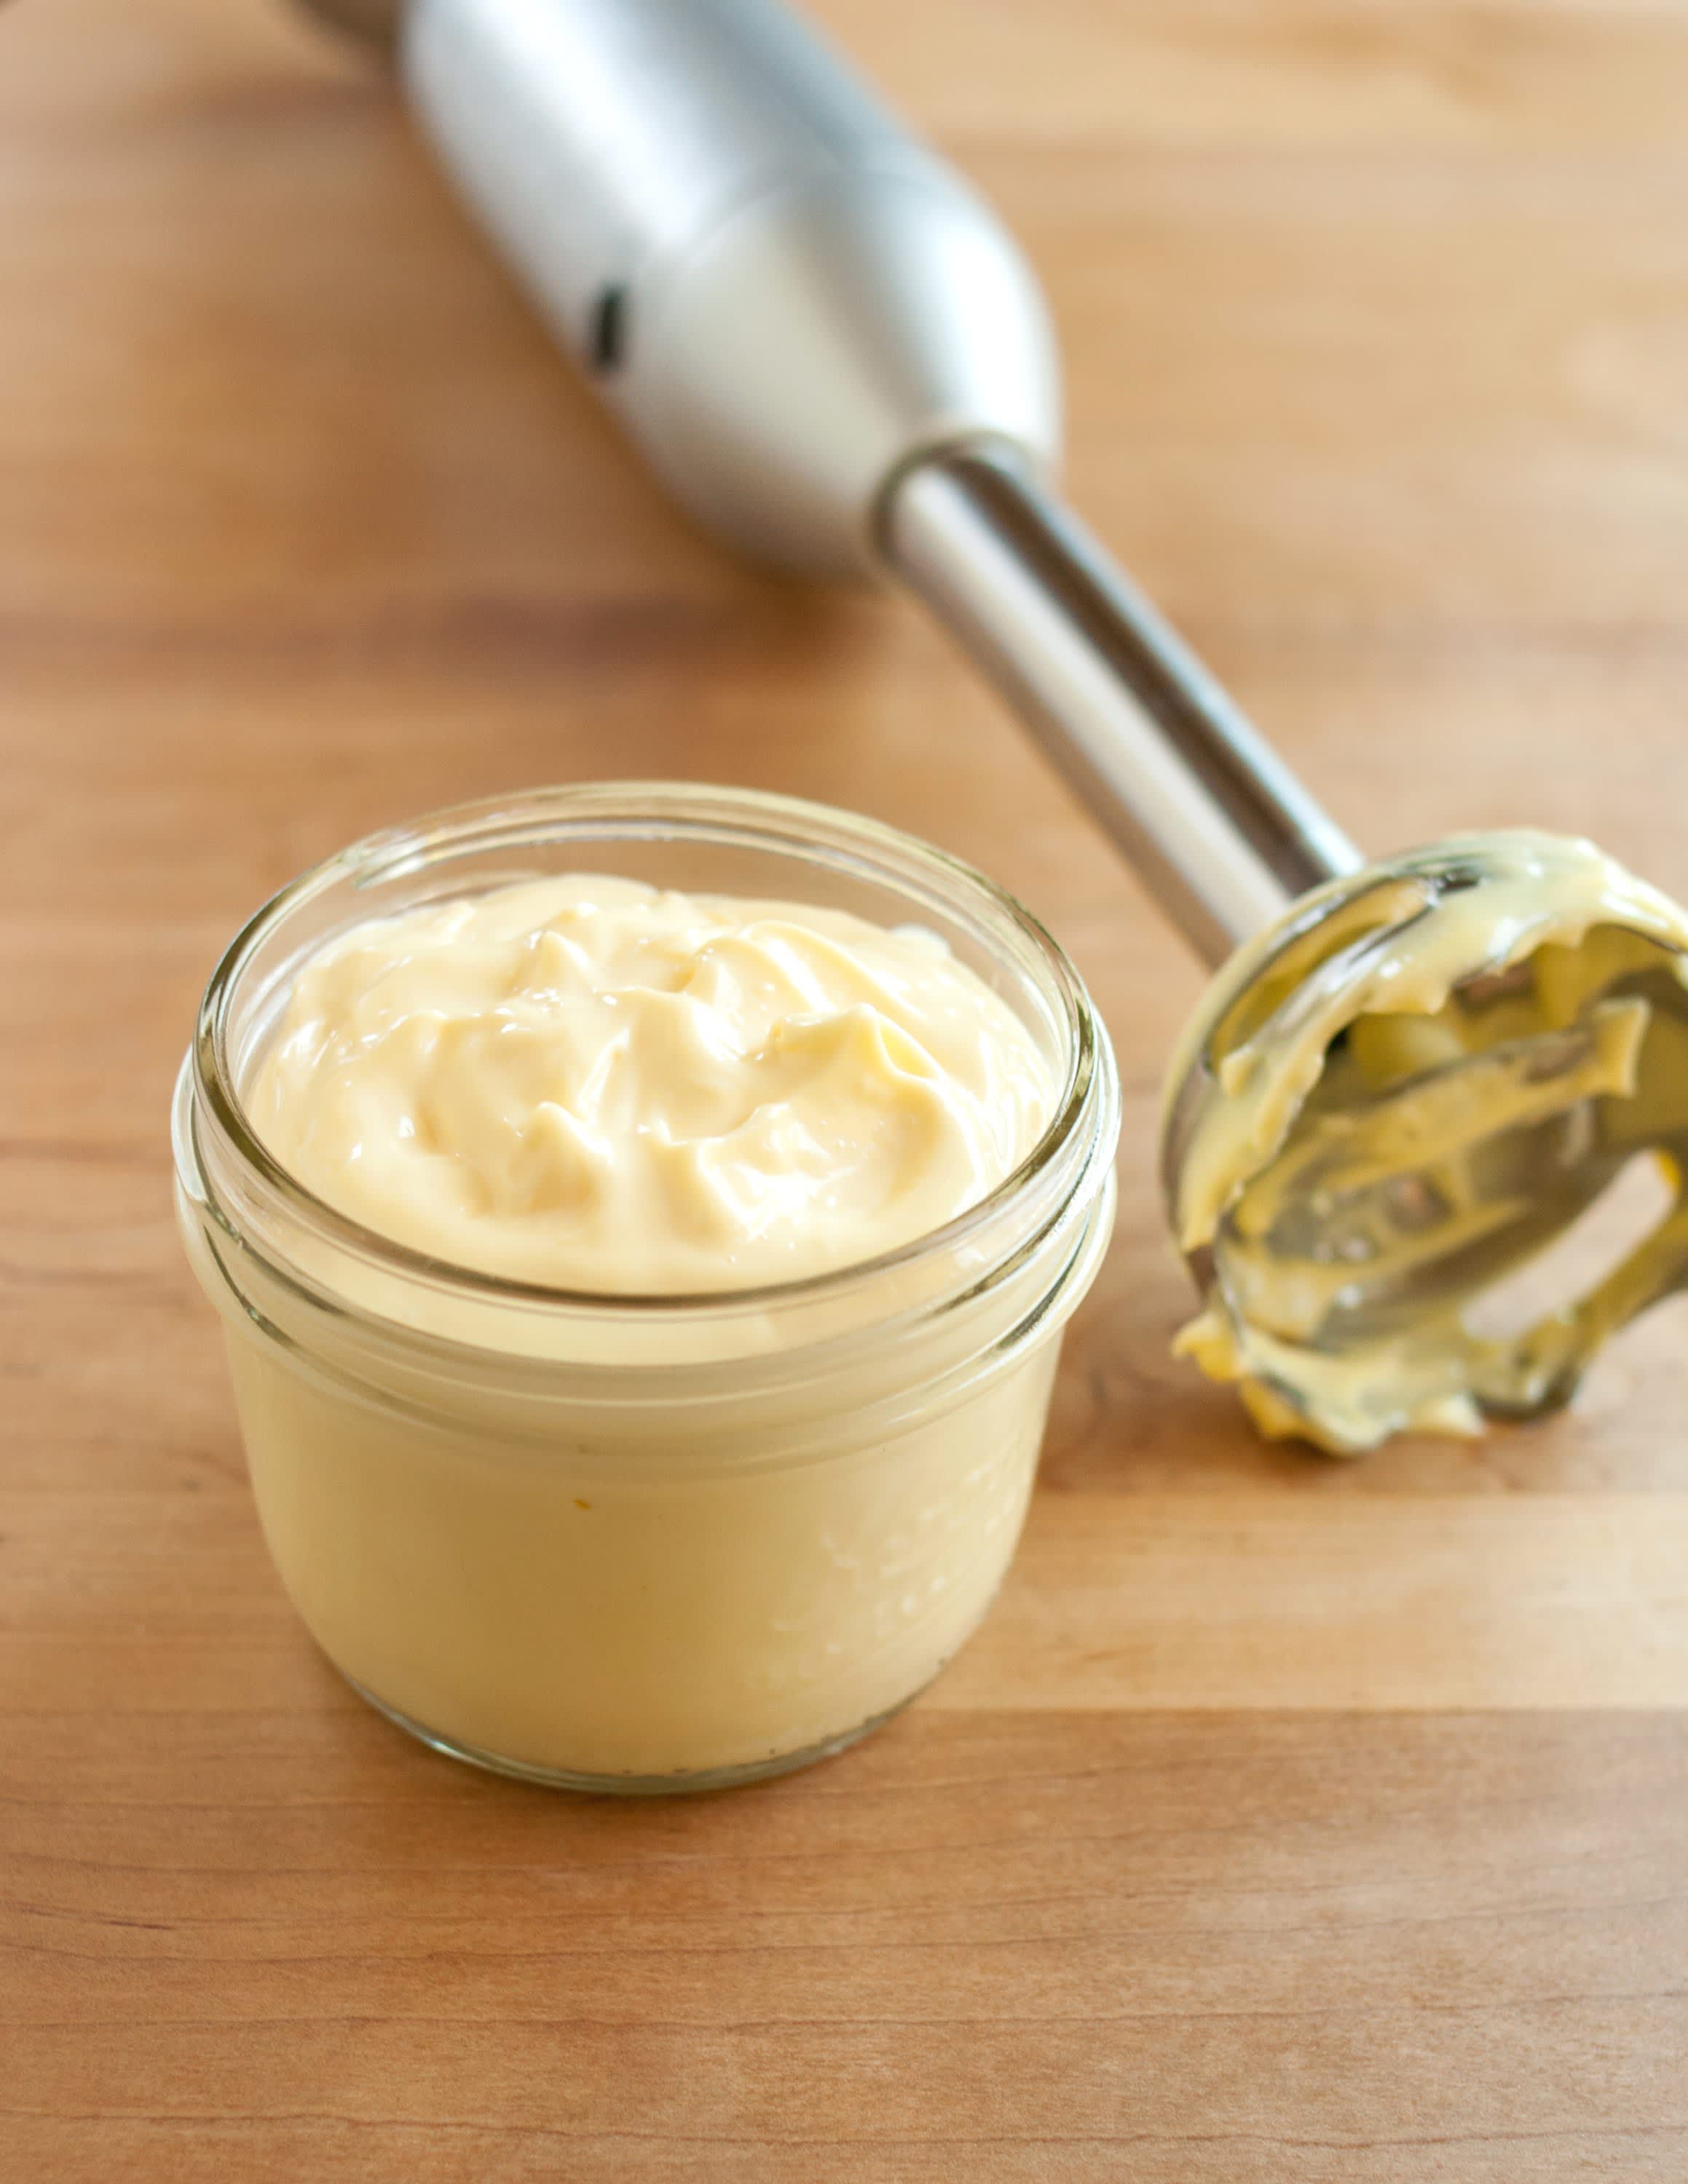 How To Make Mayonnaise with an Immersion Blender